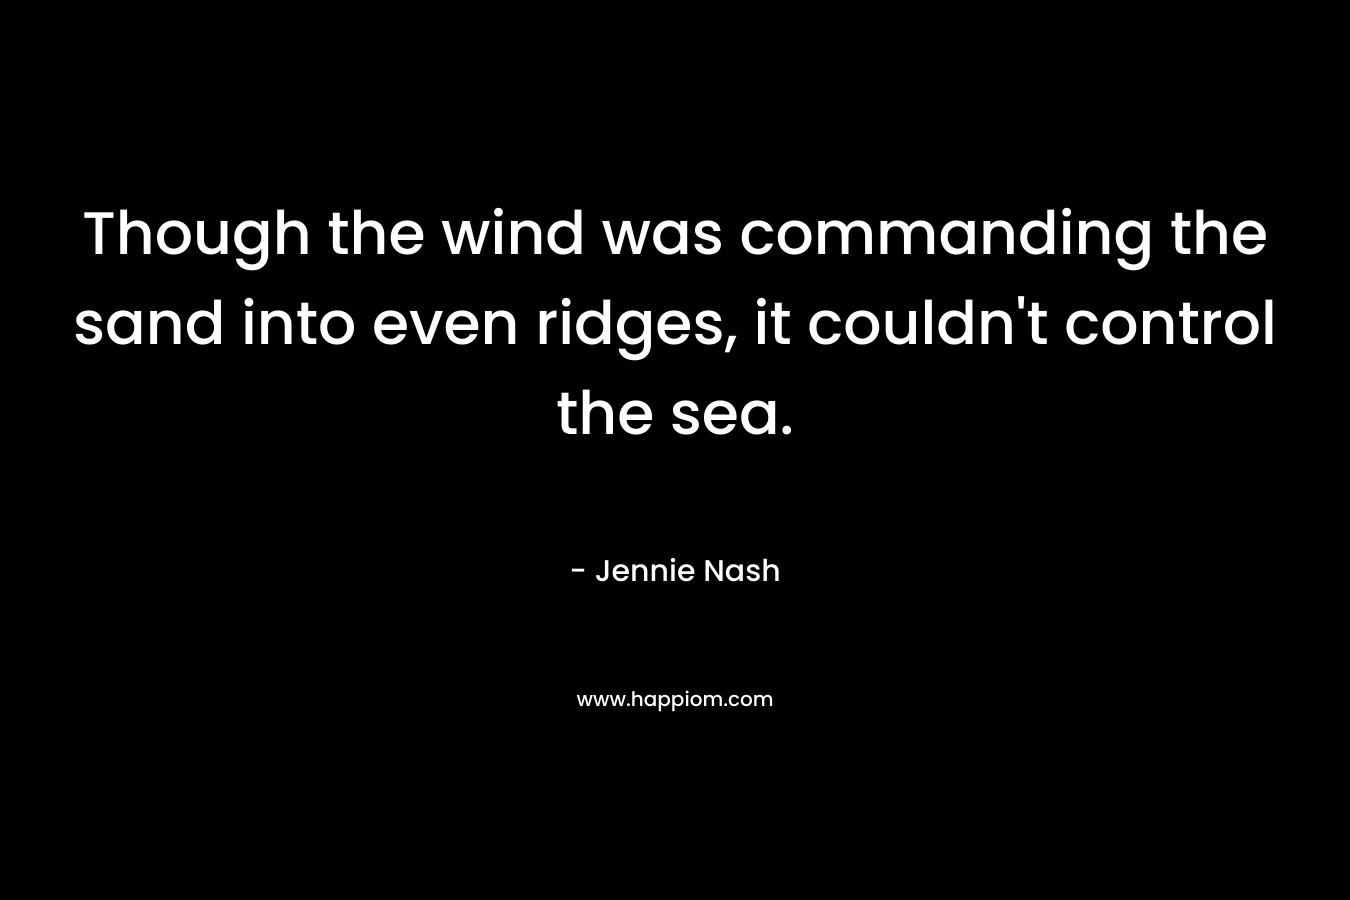 Though the wind was commanding the sand into even ridges, it couldn’t control the sea. – Jennie Nash